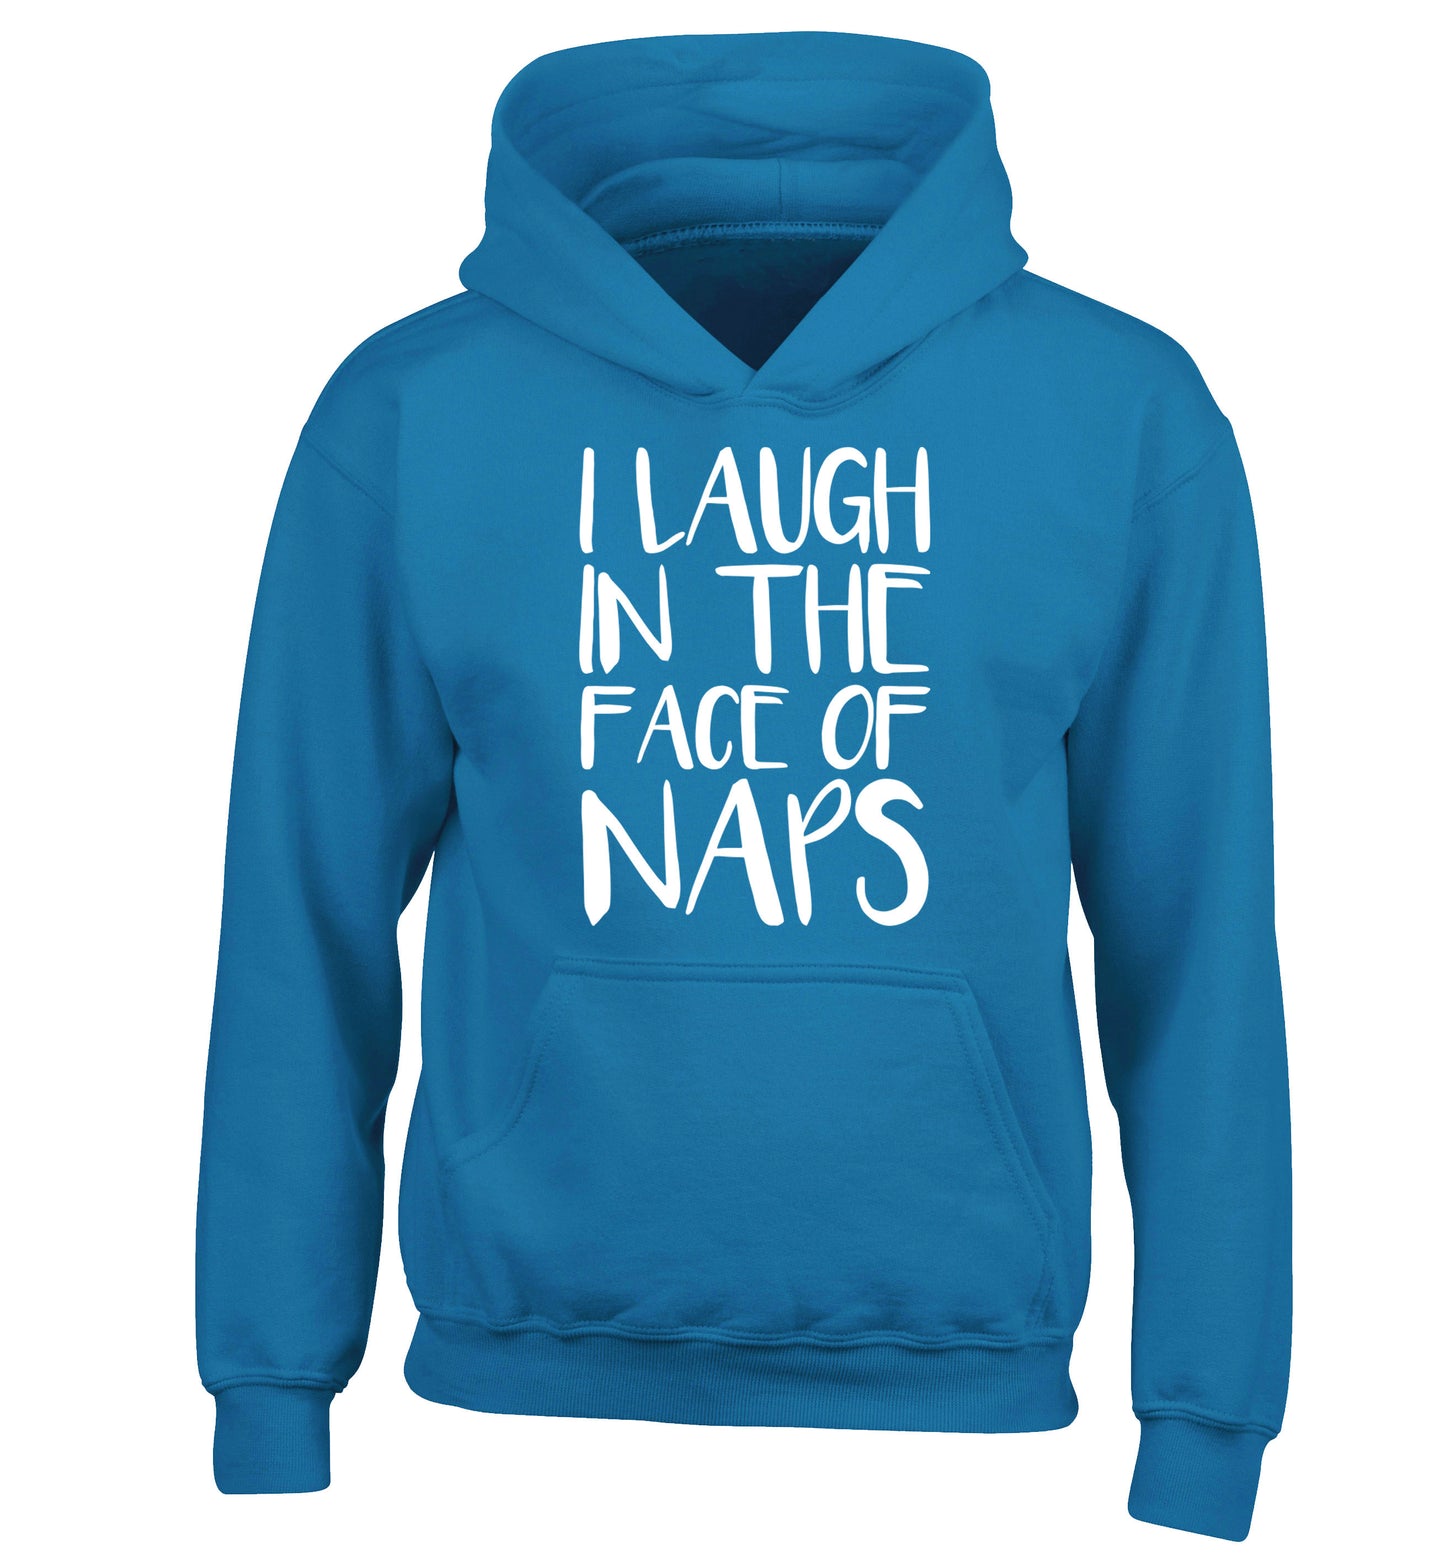 I laugh in the face of naps children's blue hoodie 12-14 Years